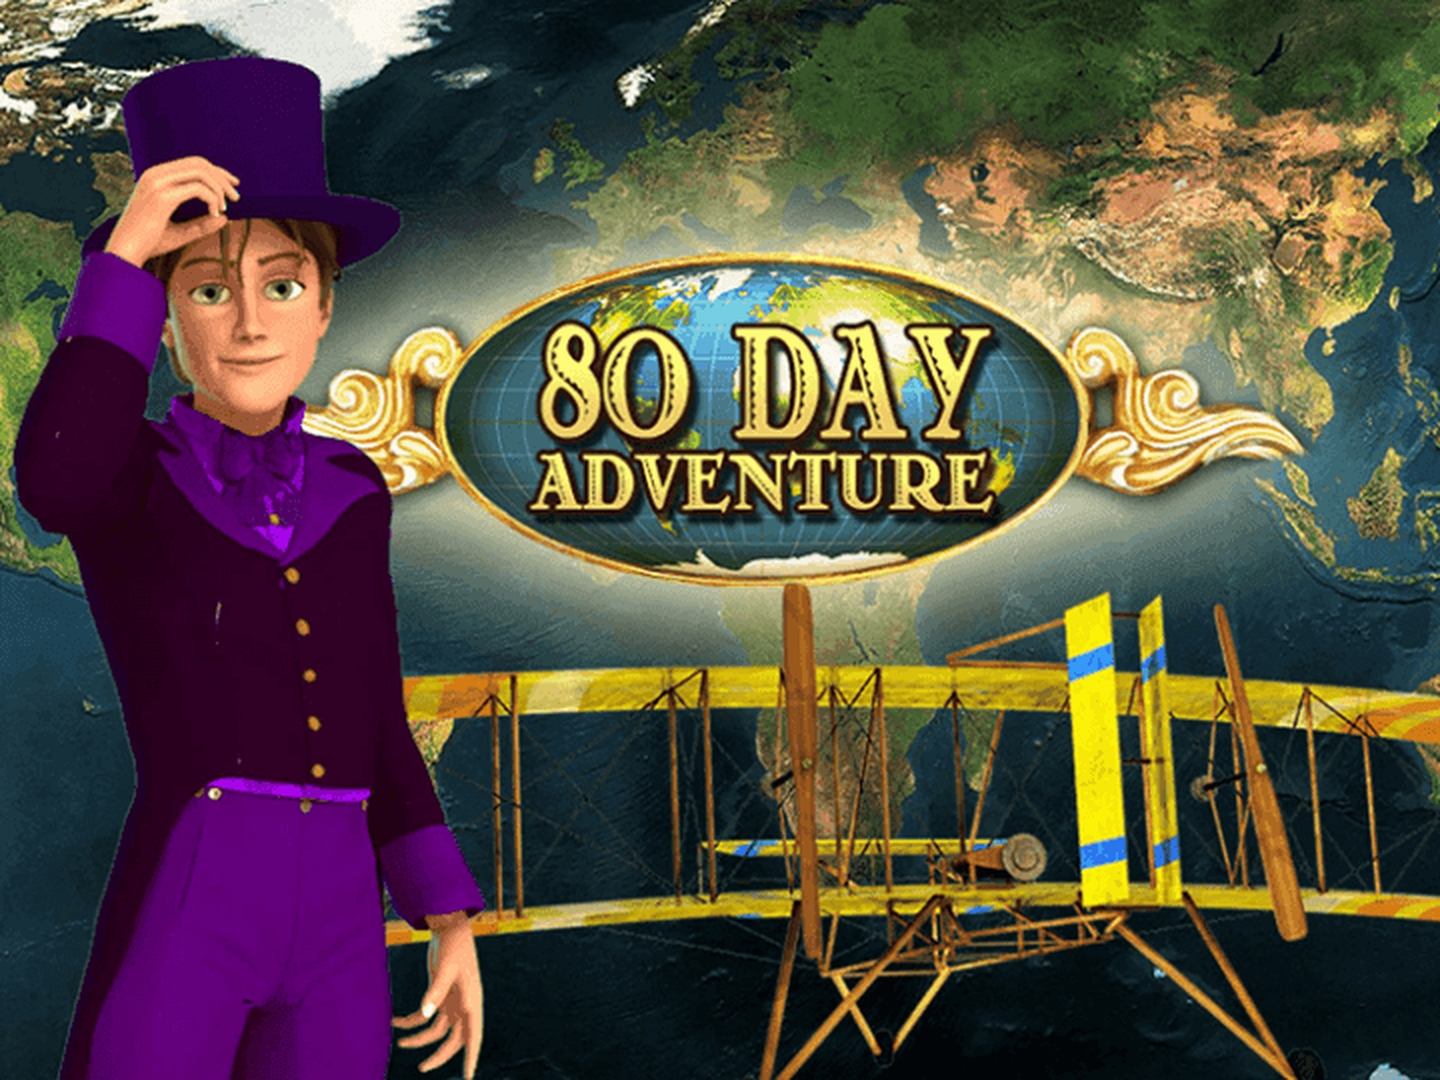 The 80 Day Adventure HD Online Slot Demo Game by World Match